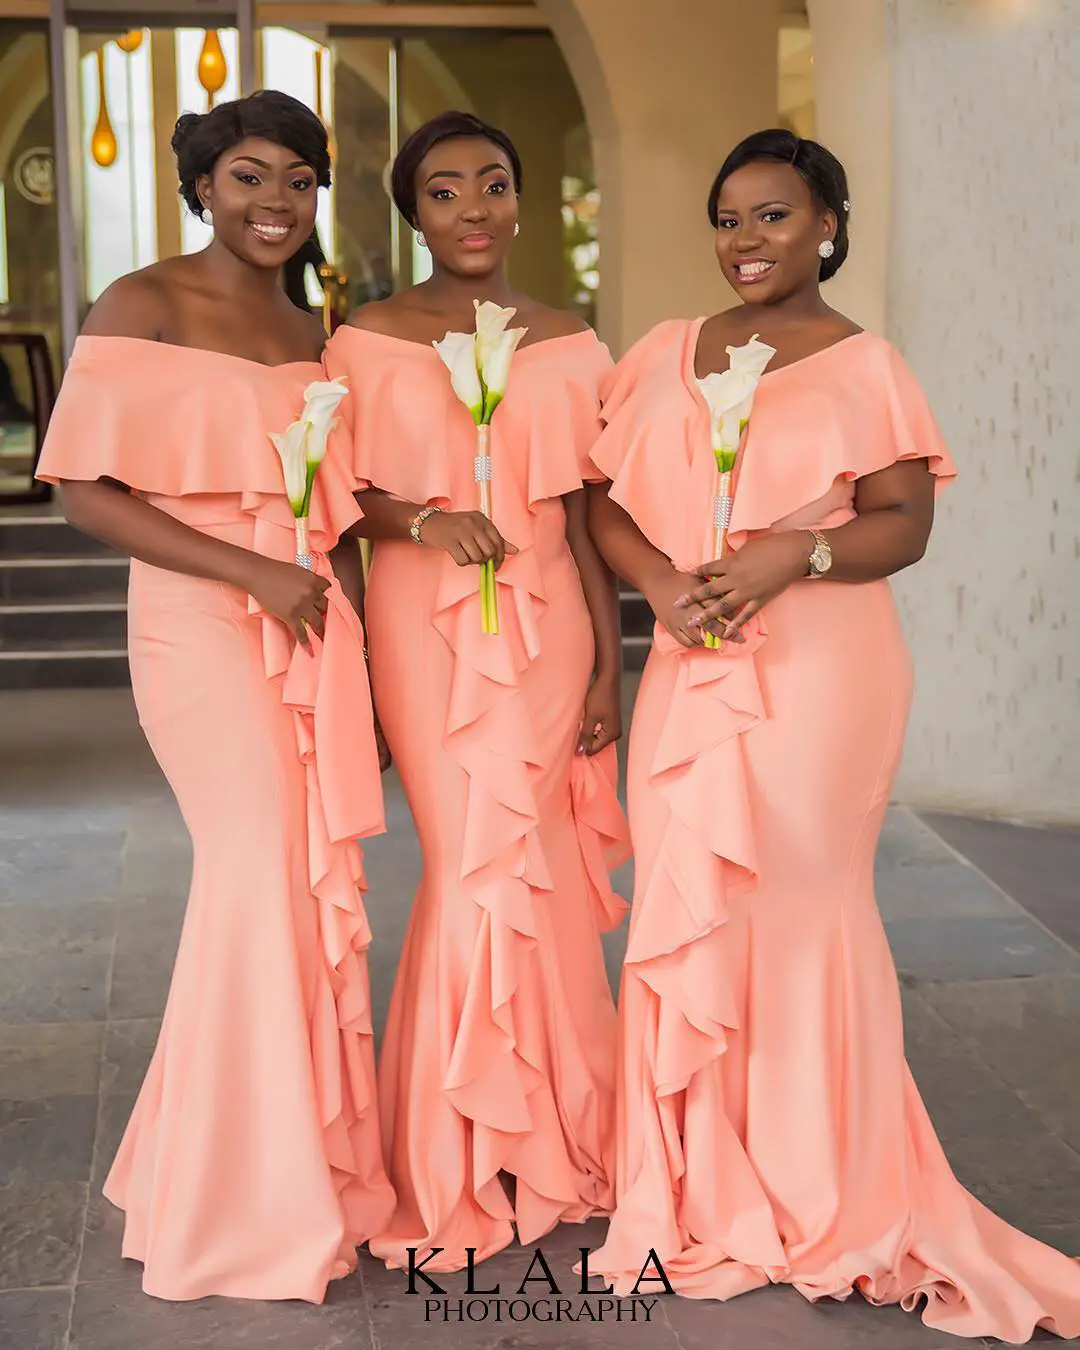  Sexy Bridesmaids Looking Their Best For Their Girl!